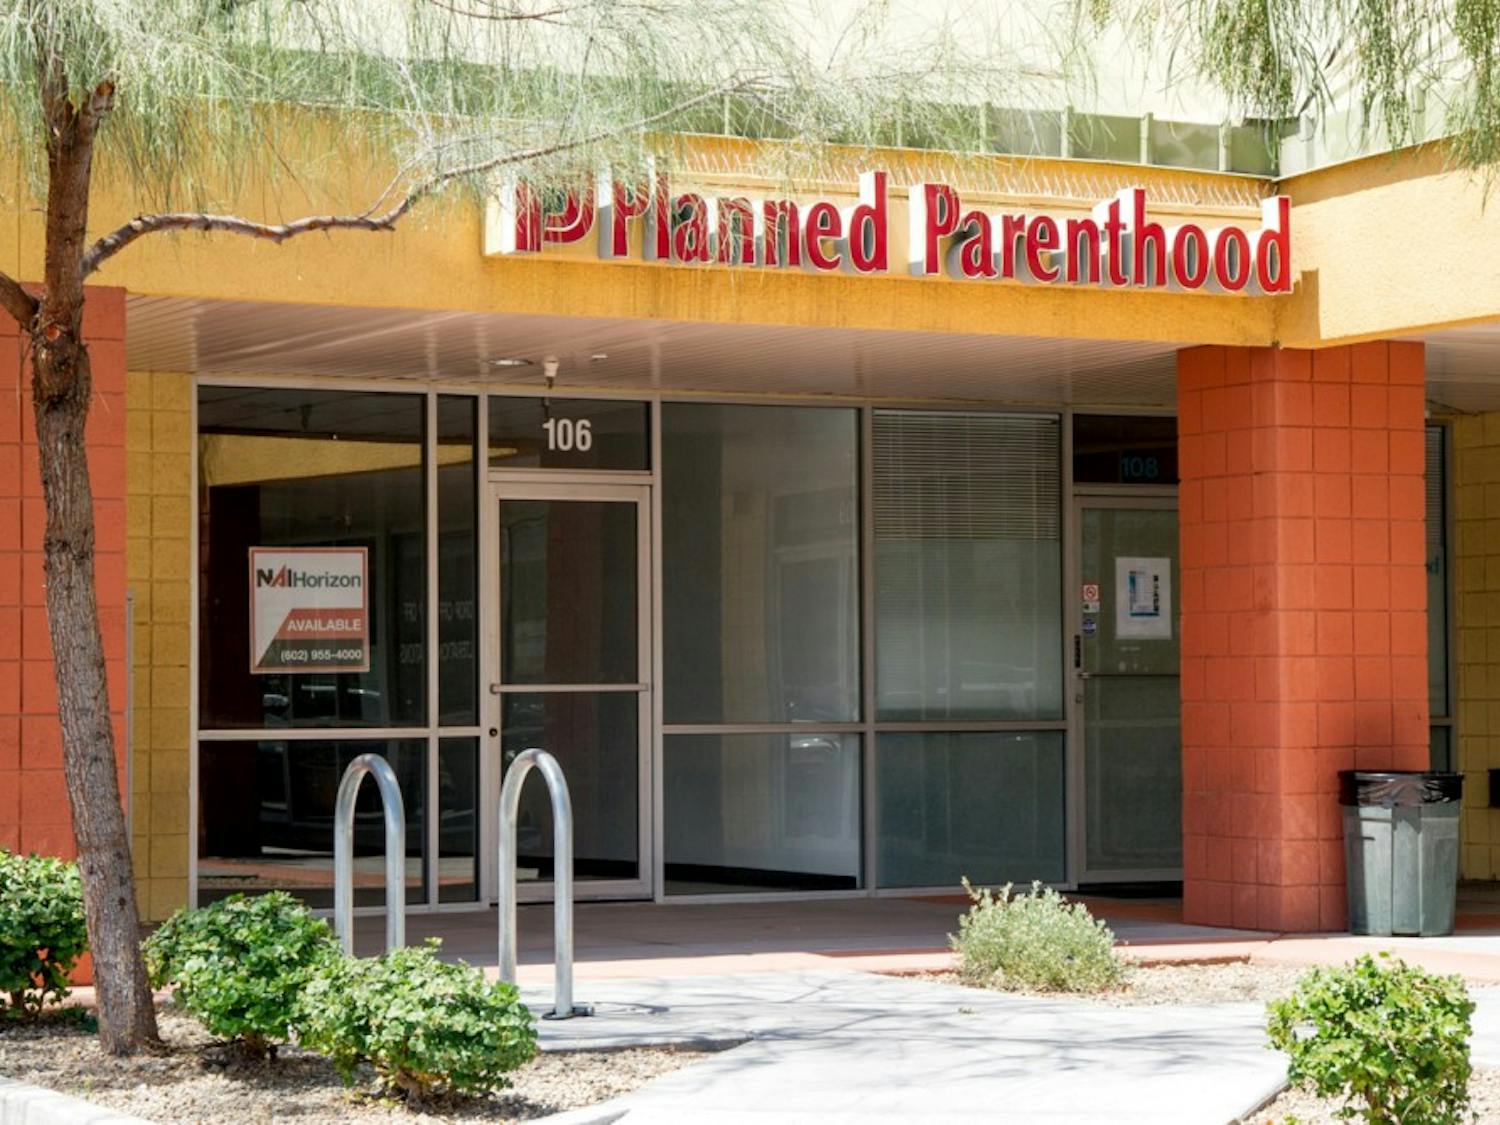 Planned Parenthood, located at 1250 E Apache Blvd Suite 108 in Tempe is pictured on Wednesday,&nbsp;April 6, 2016.